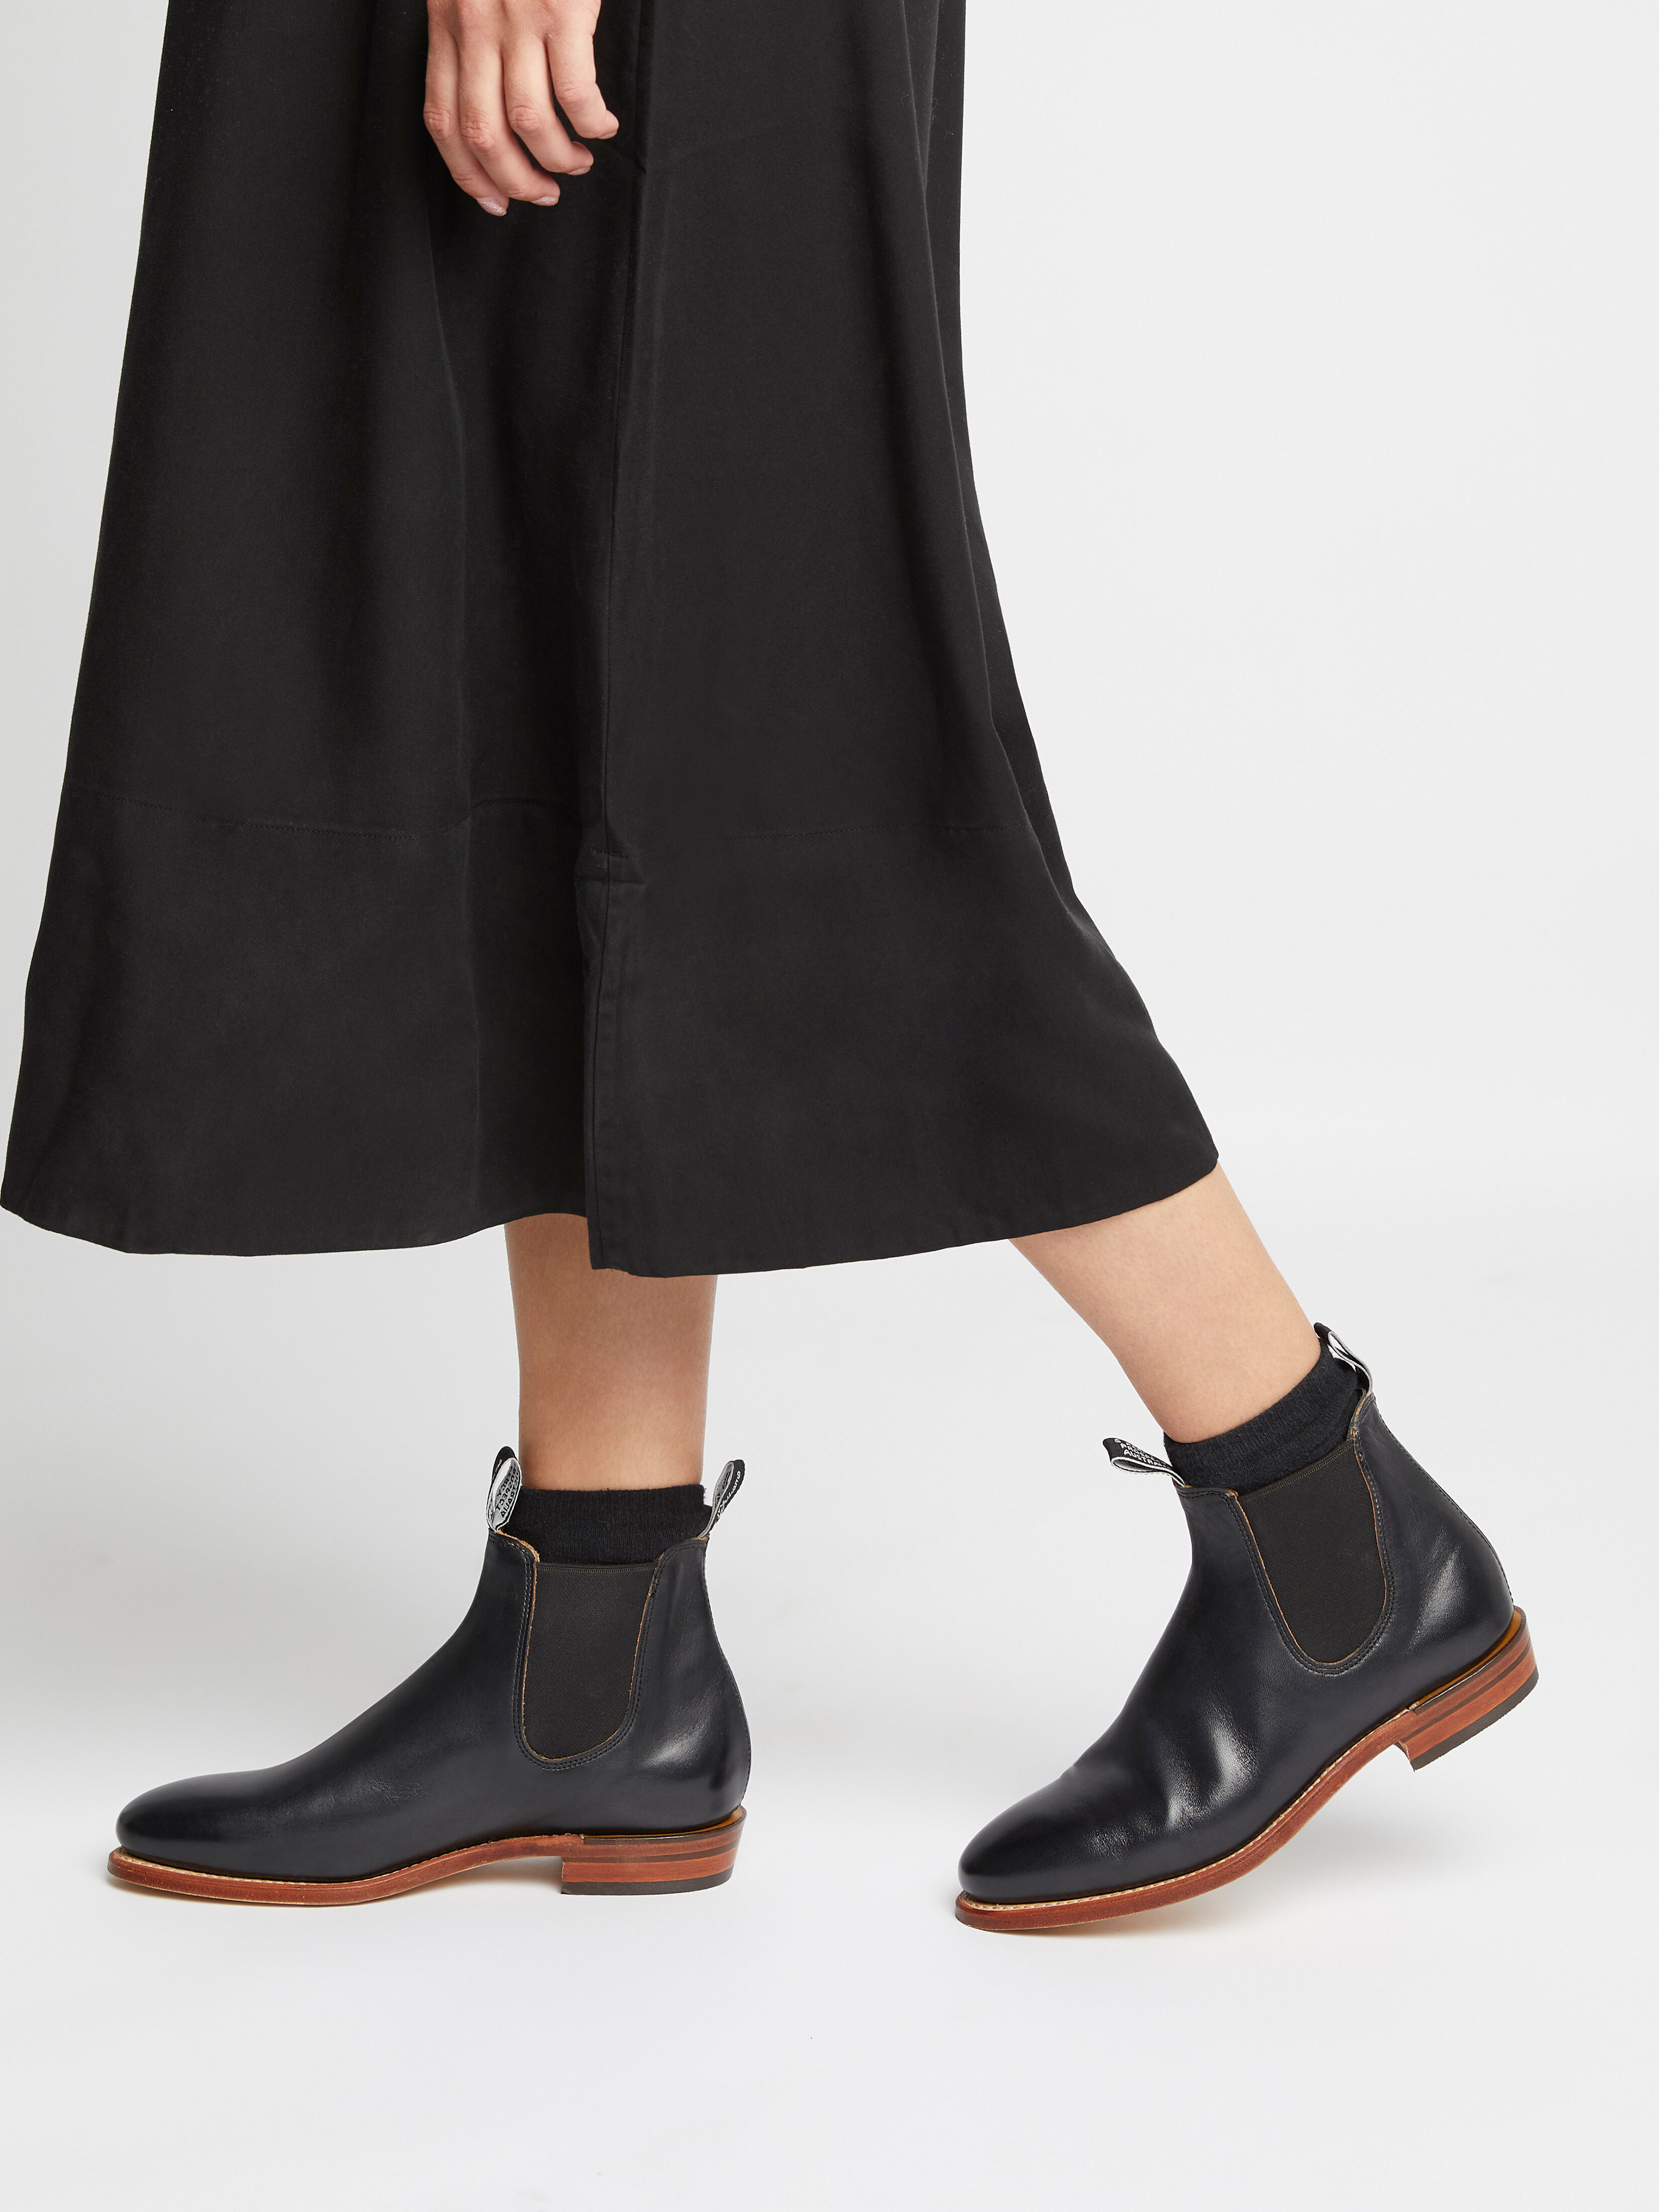 rm williams ankle boots